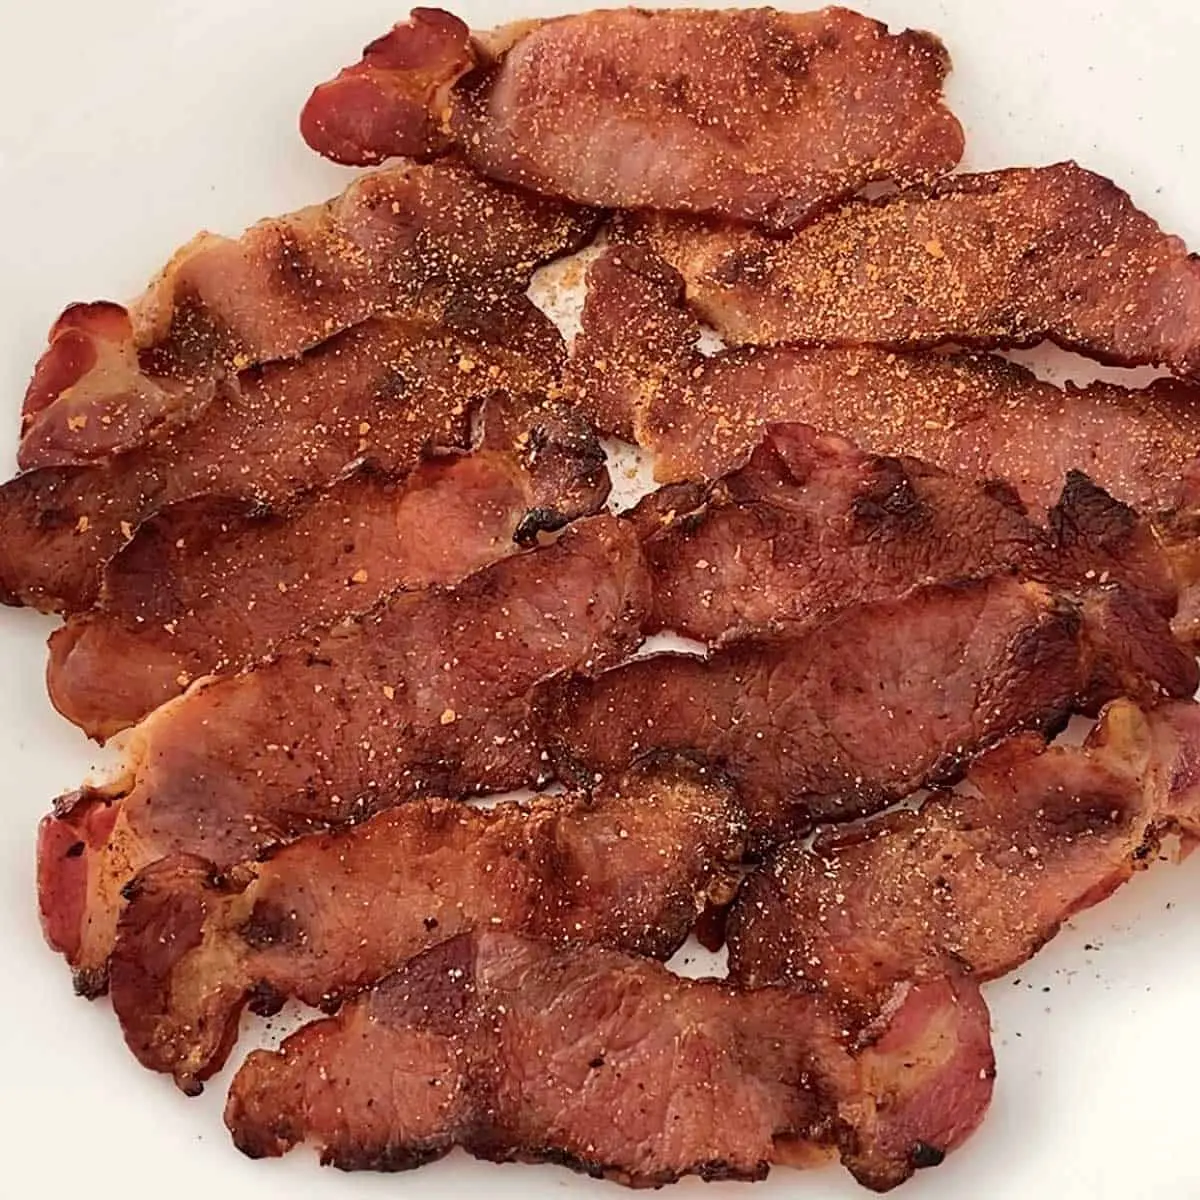 how to cook smoked back bacon - Do you cook smoked bacon